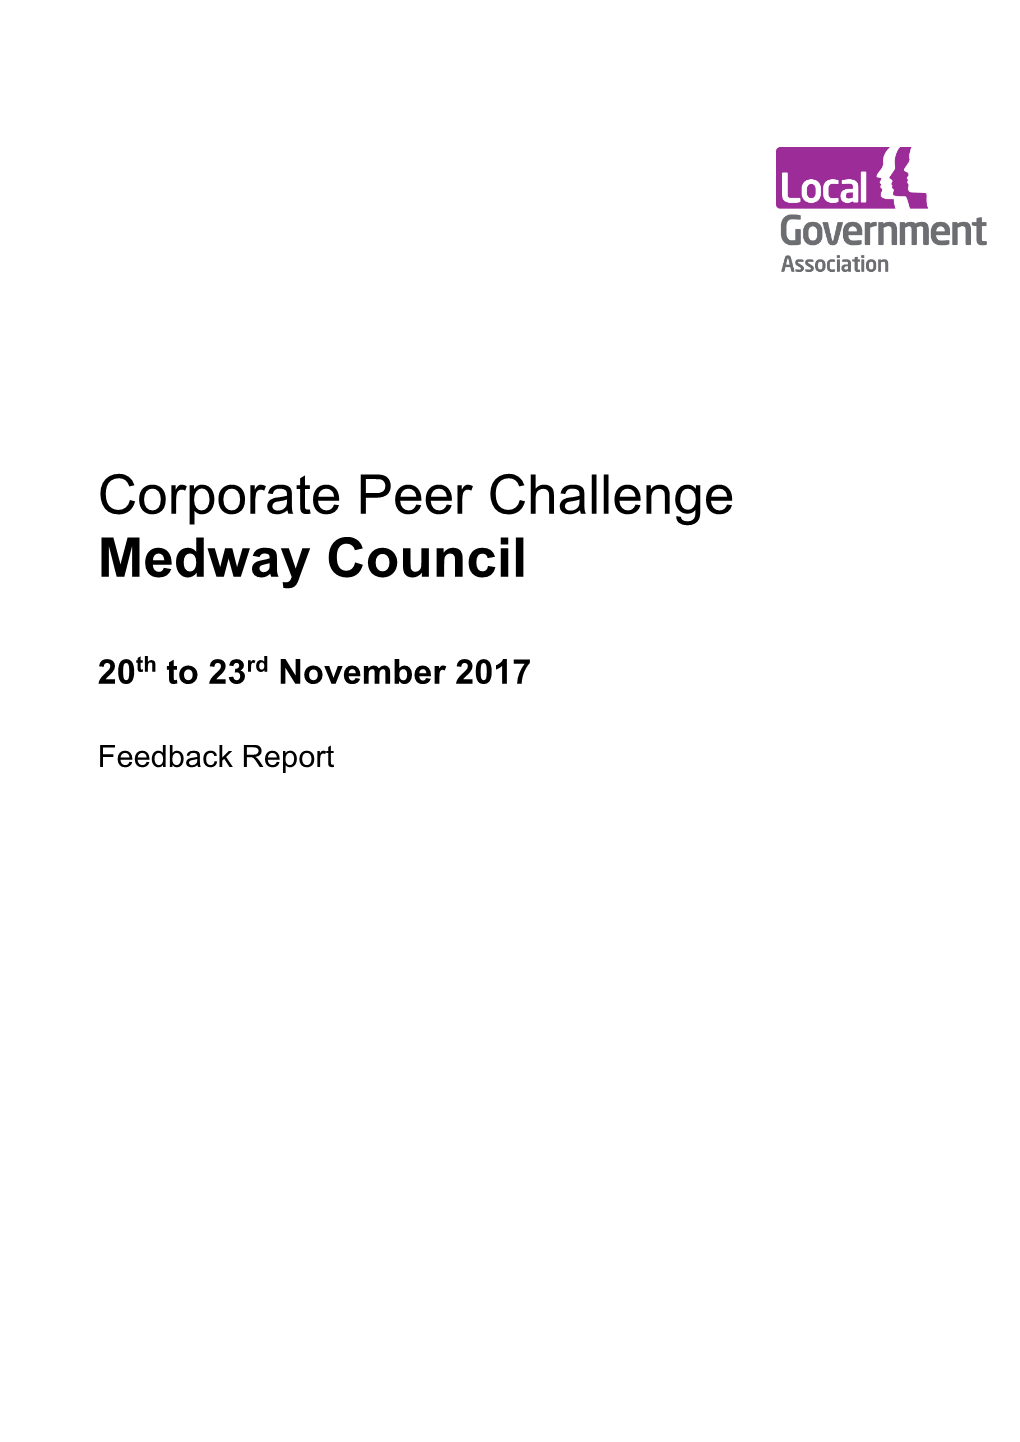 Medway Council Corporate Peer Challenge November 2017